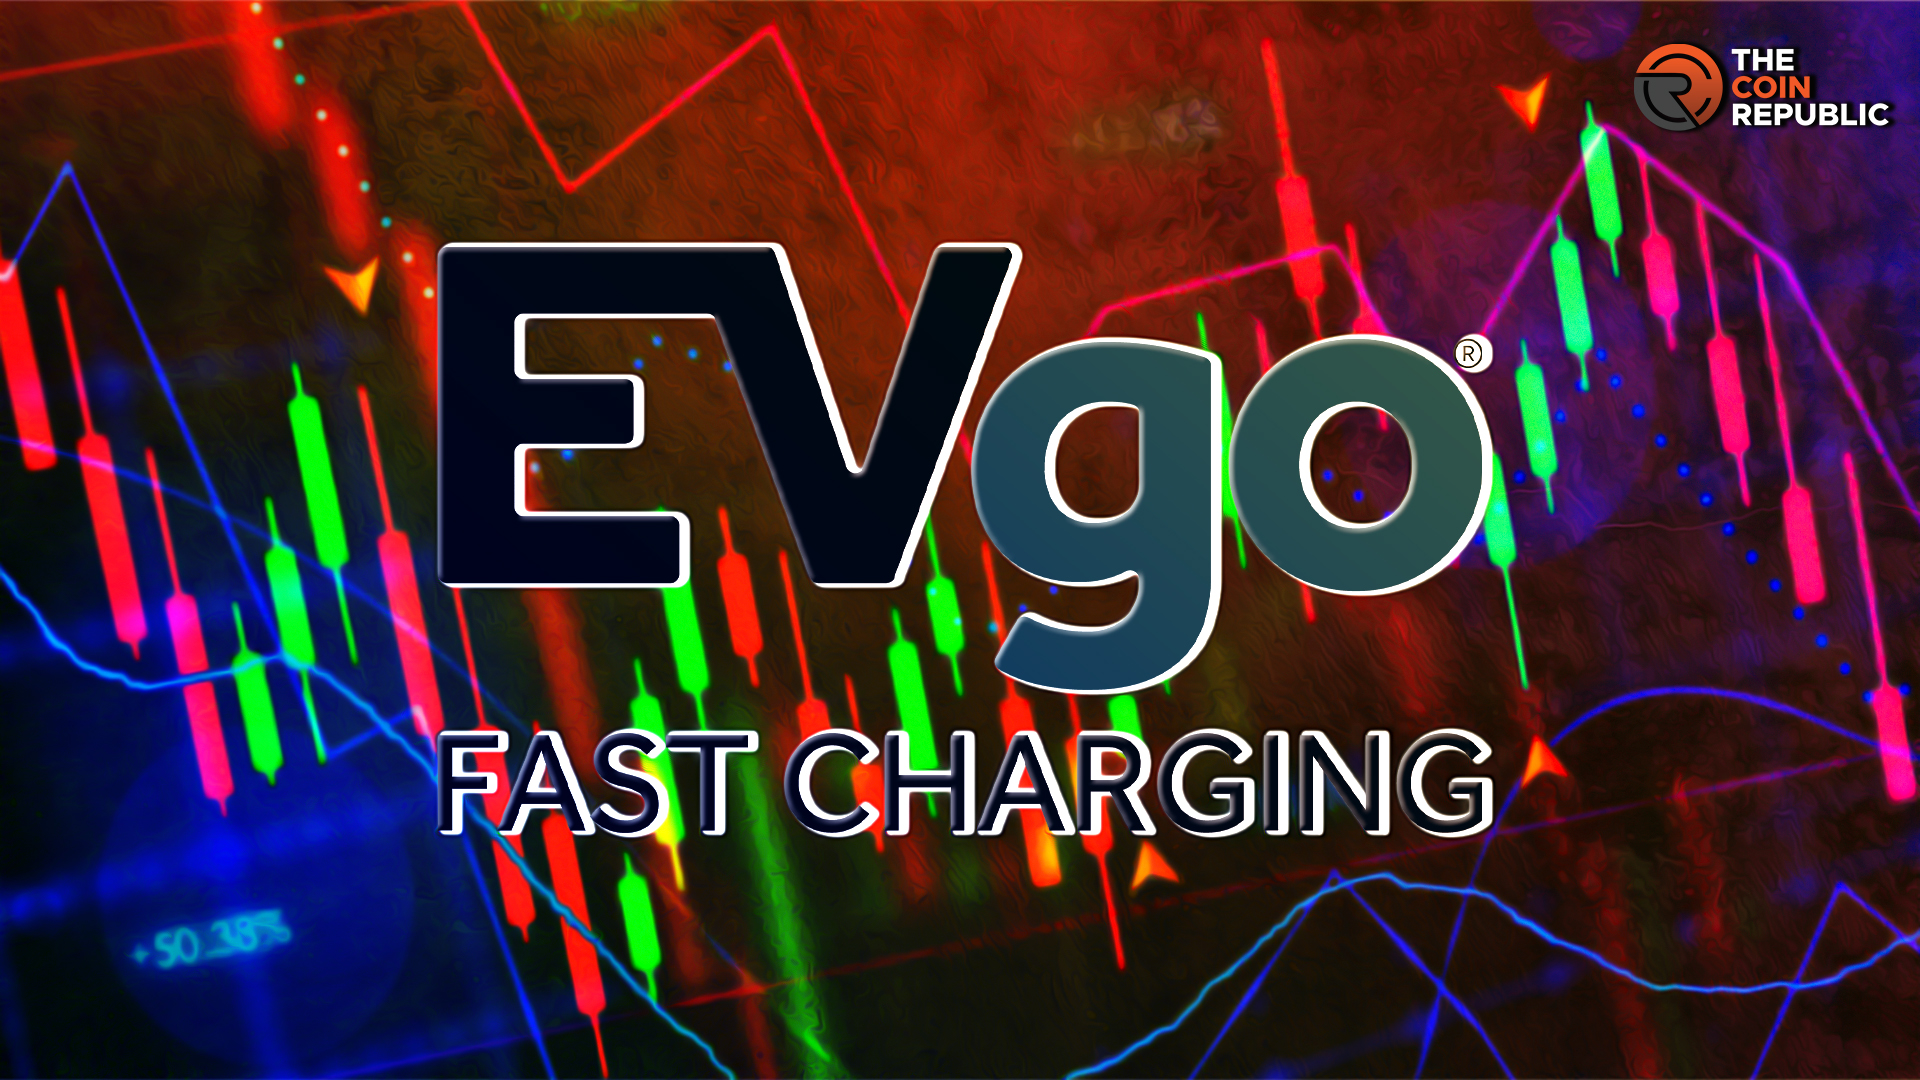 EVGO Stock: is it Time to Buy, Sell, or Hold Evgo Stock?